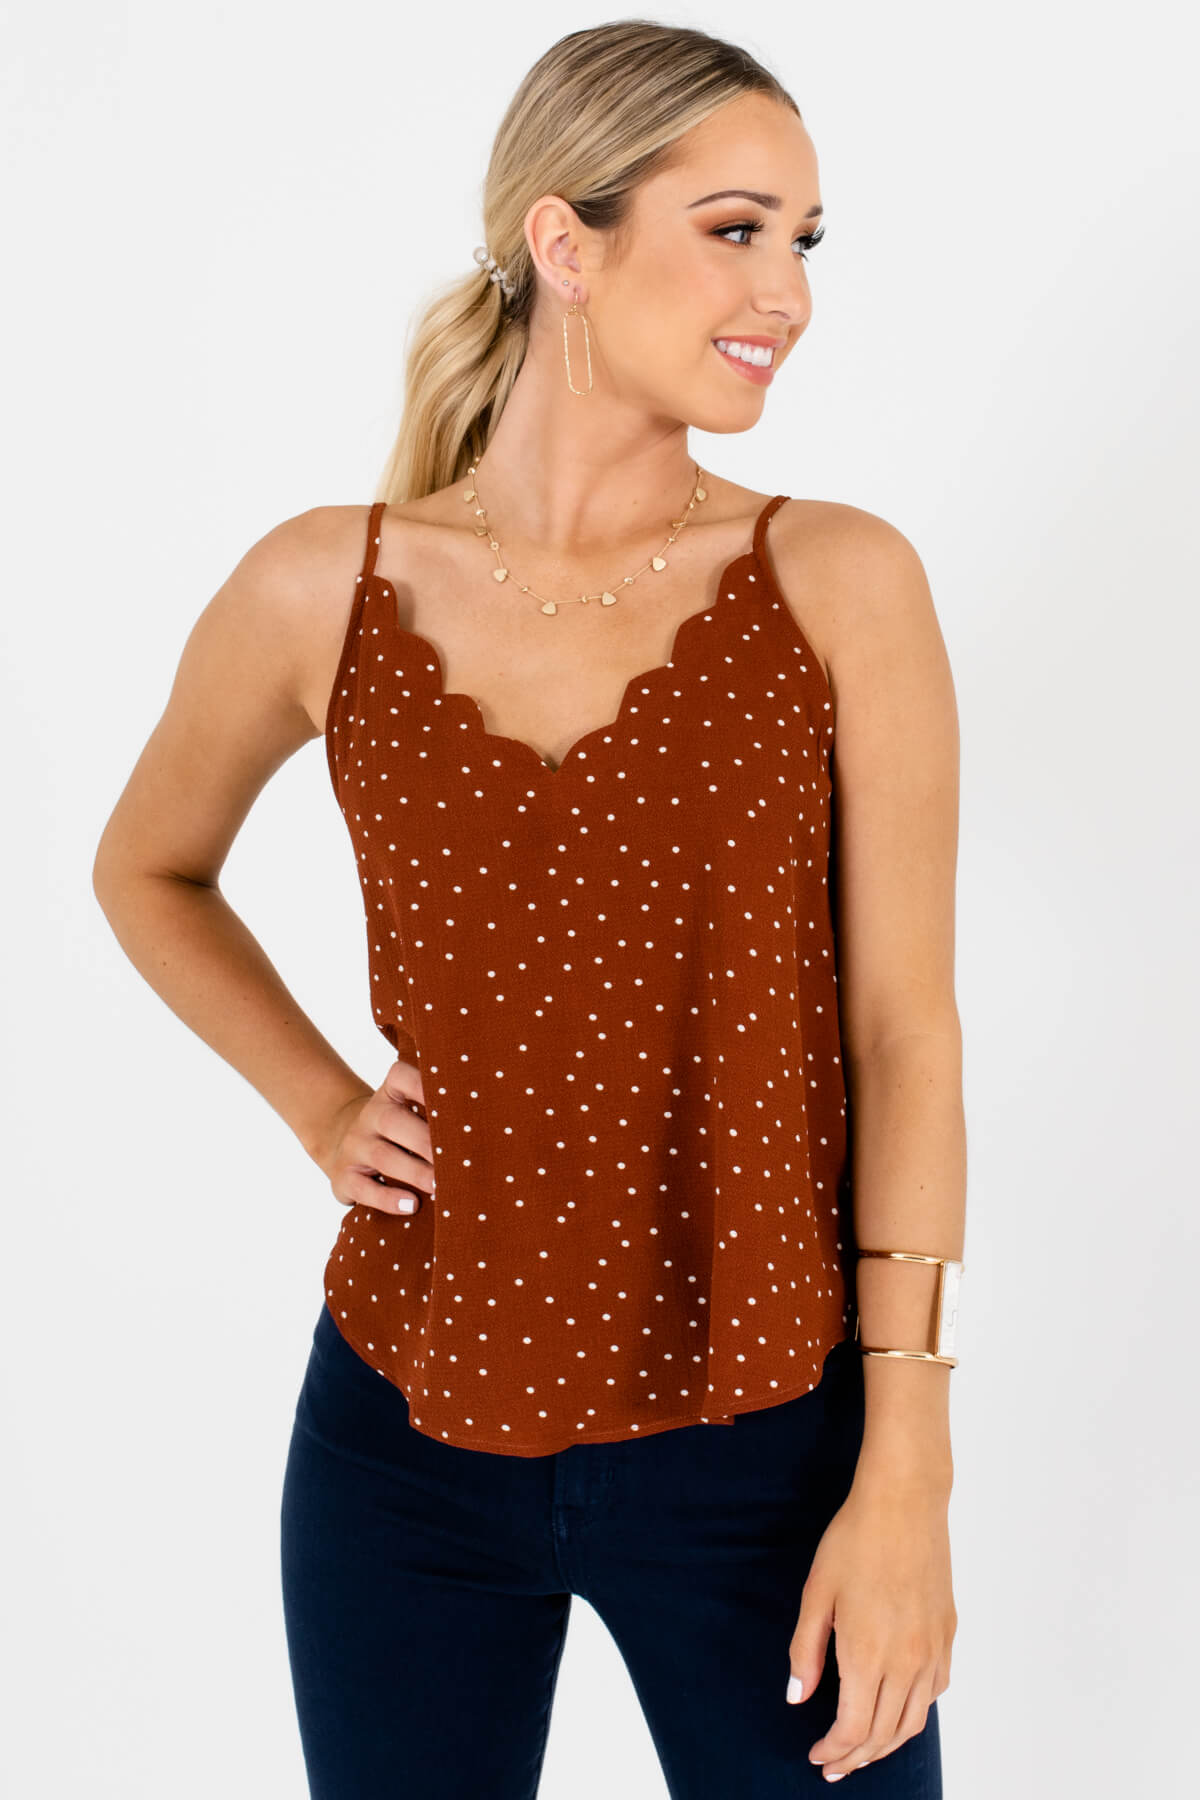 Rust Brown Polka Dot Scalloped Tank Tops Affordable Online Boutique